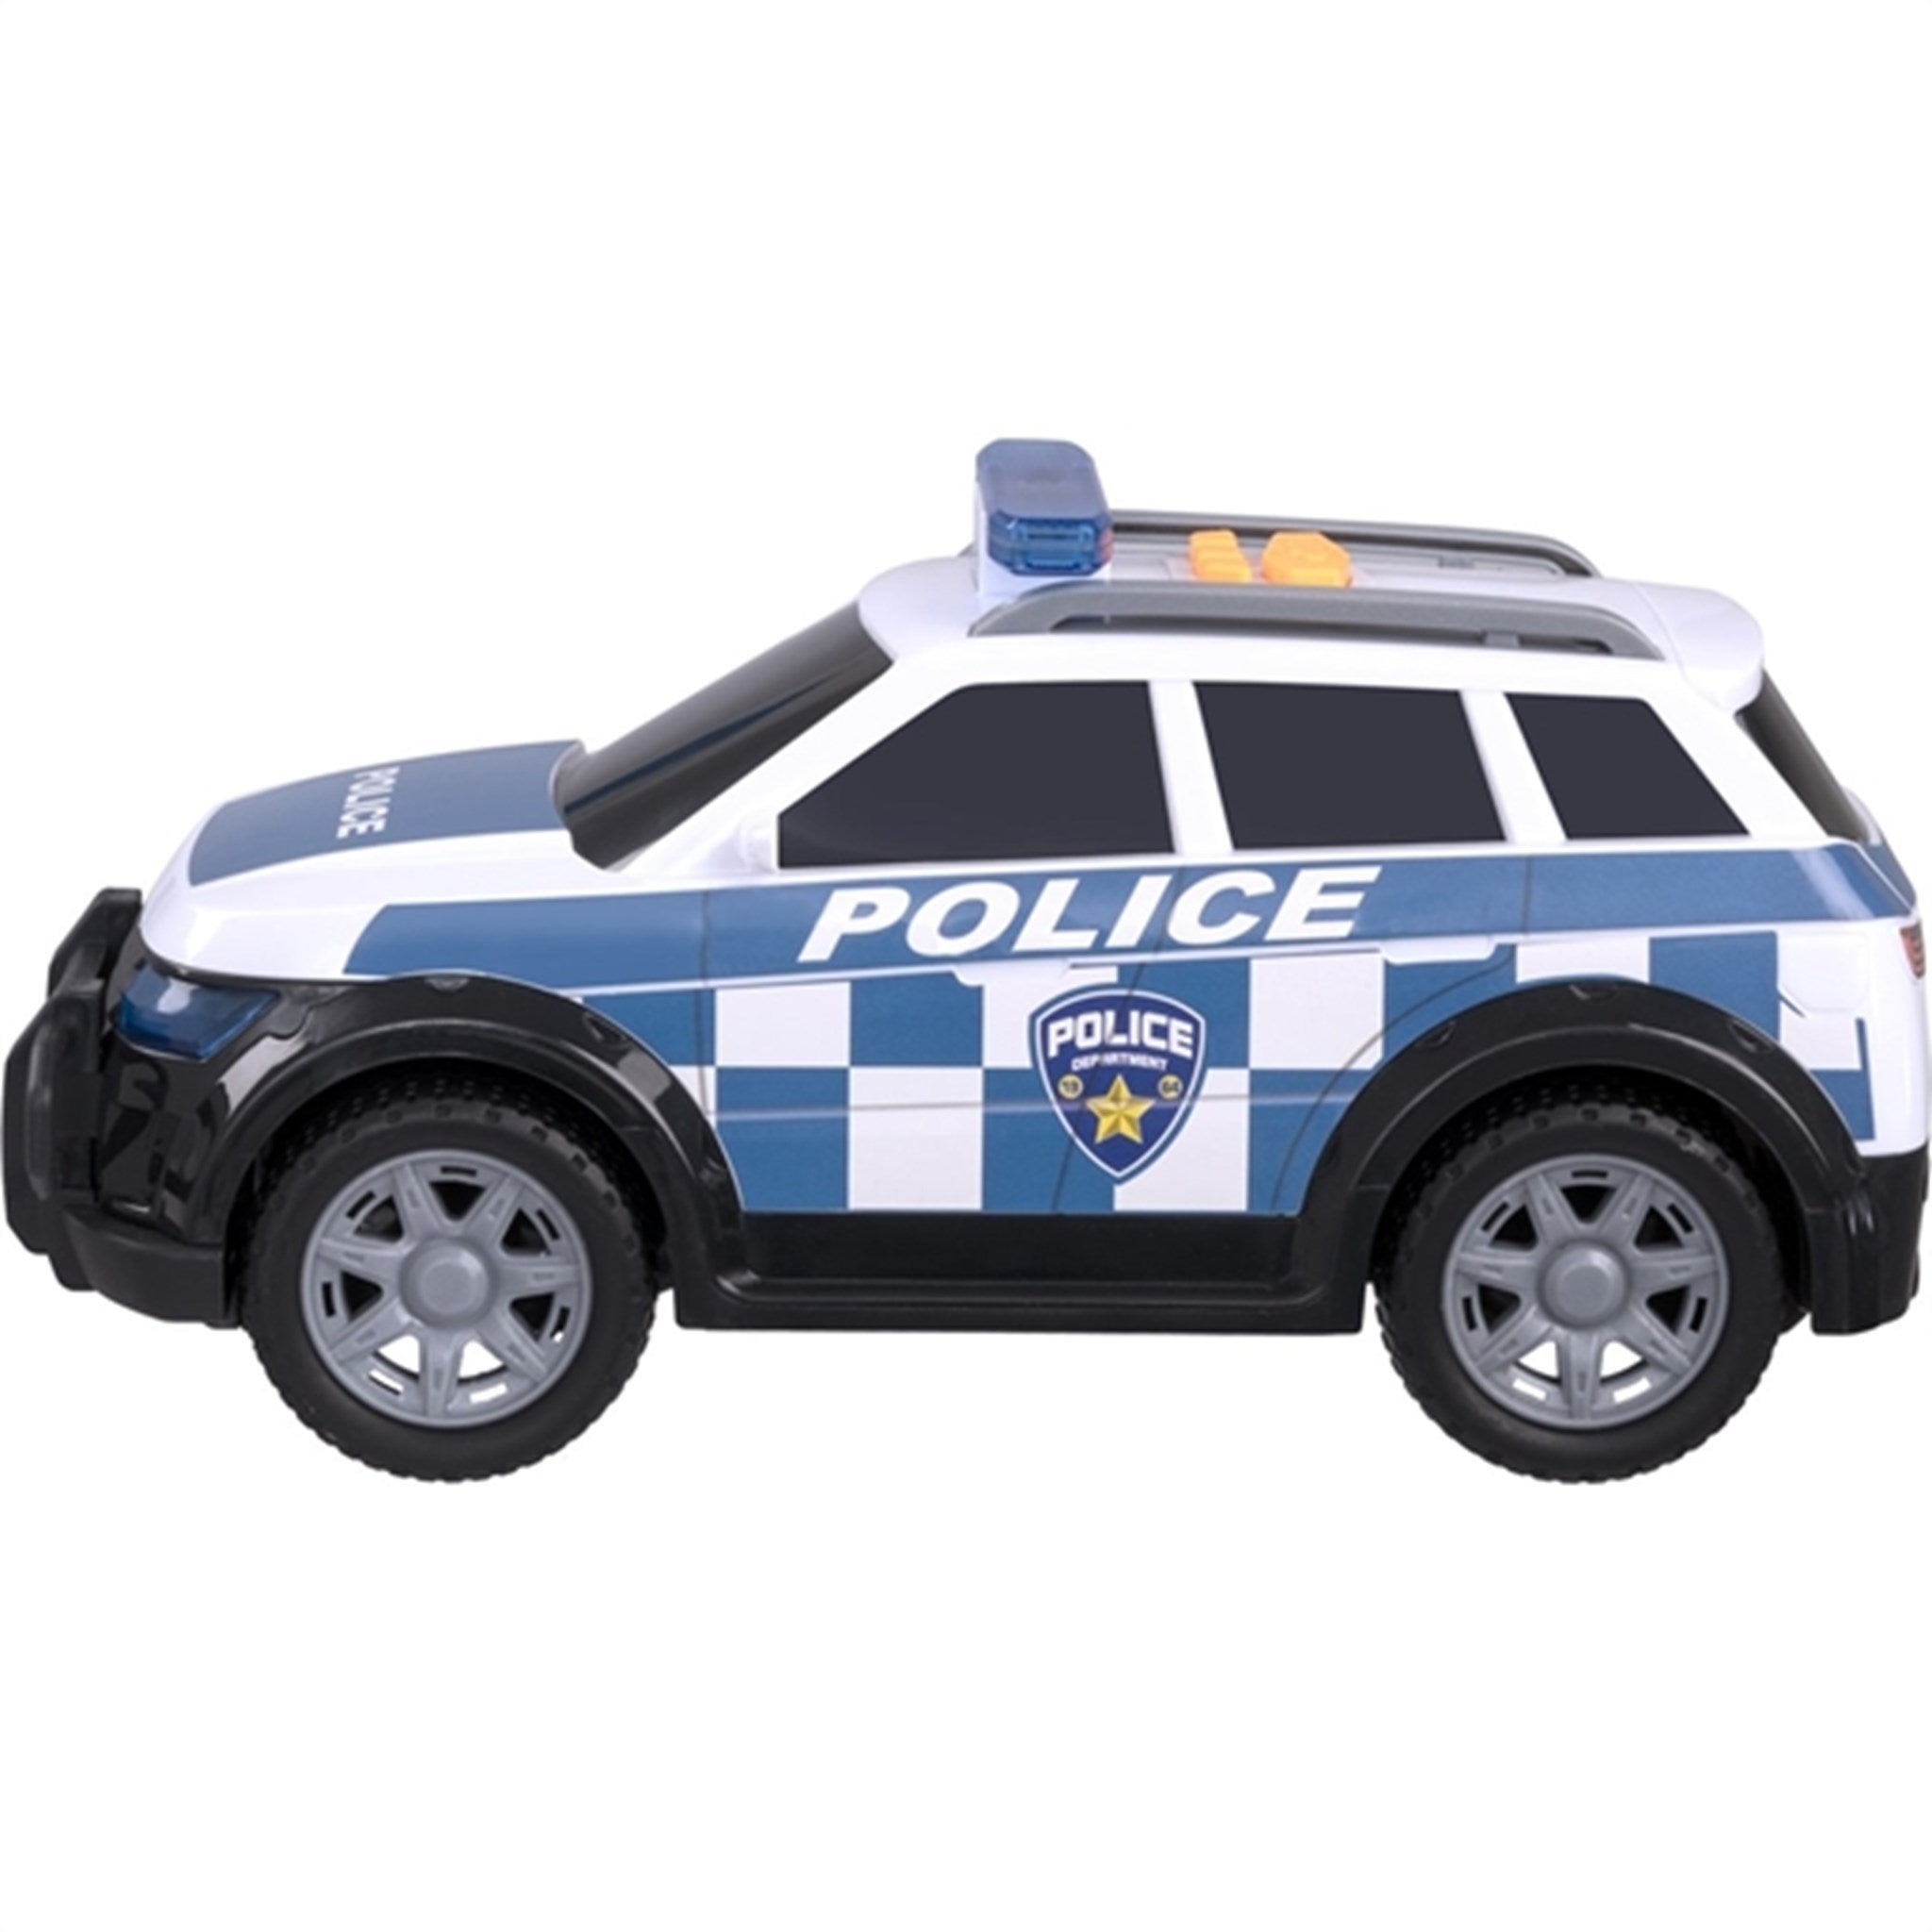 Teamsterz Mighty Moverz Police 4 x 4 White 2